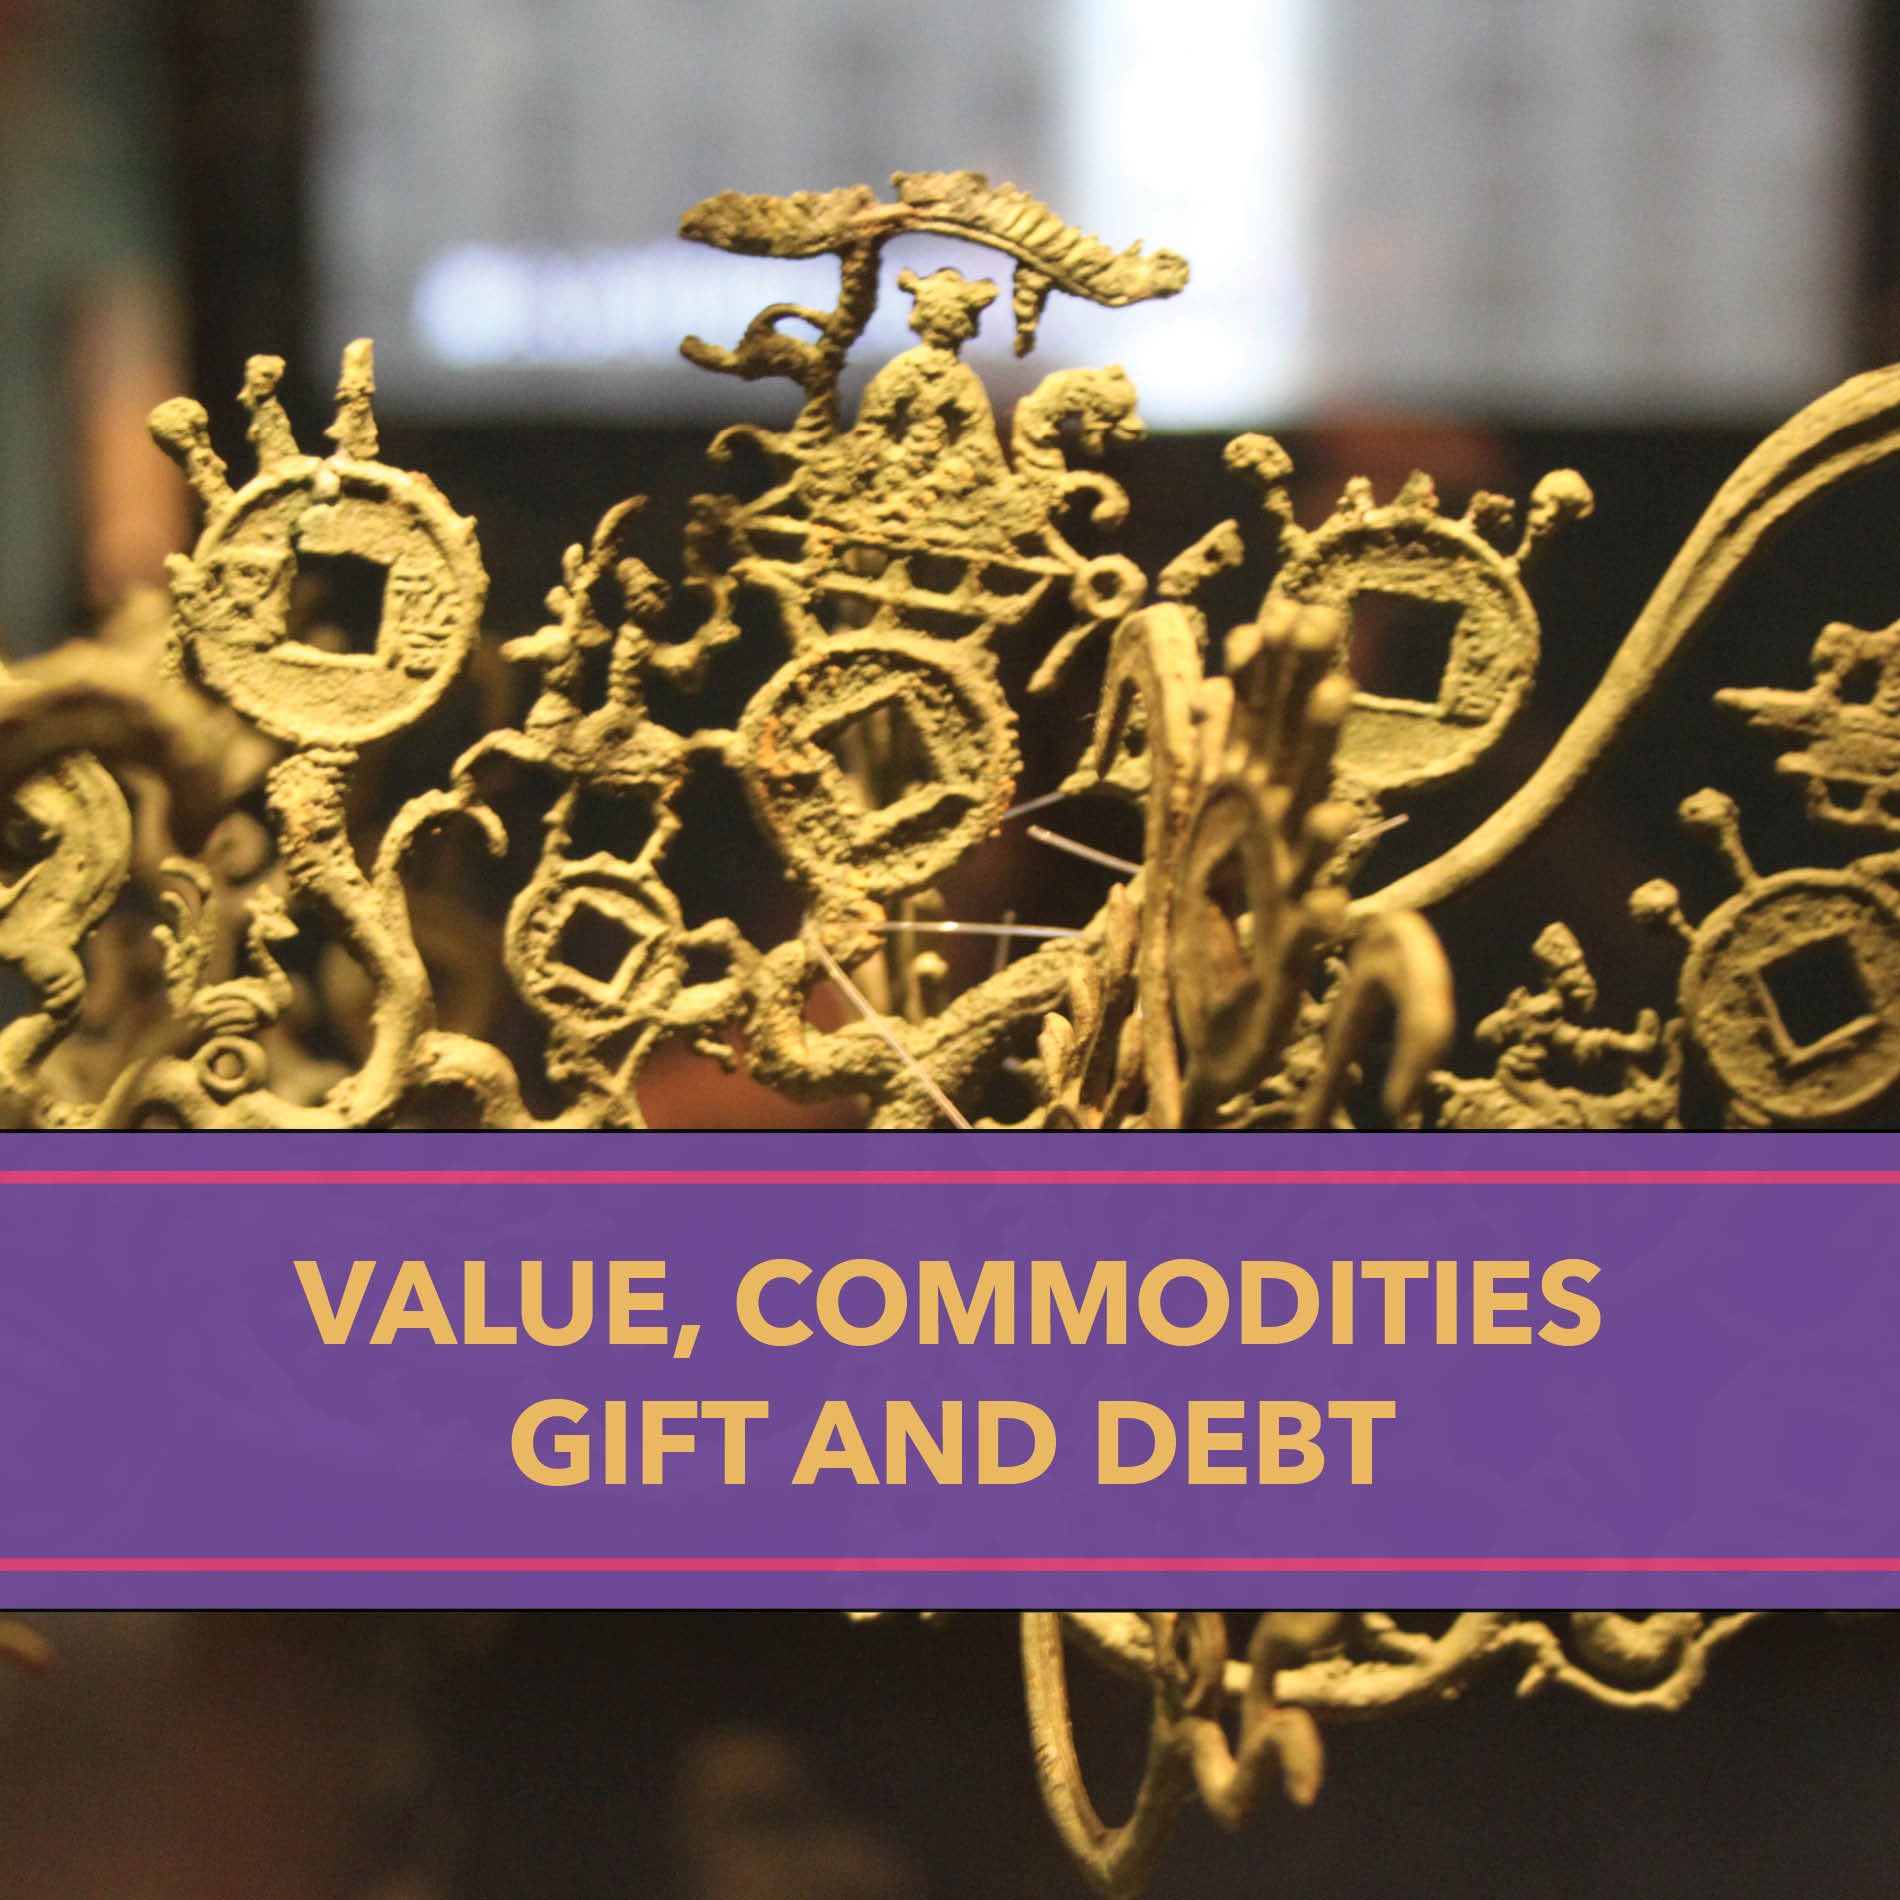 Image Card, with Eastern Han Money Tree and title: 'Value, Commodities, Gift and Debt'